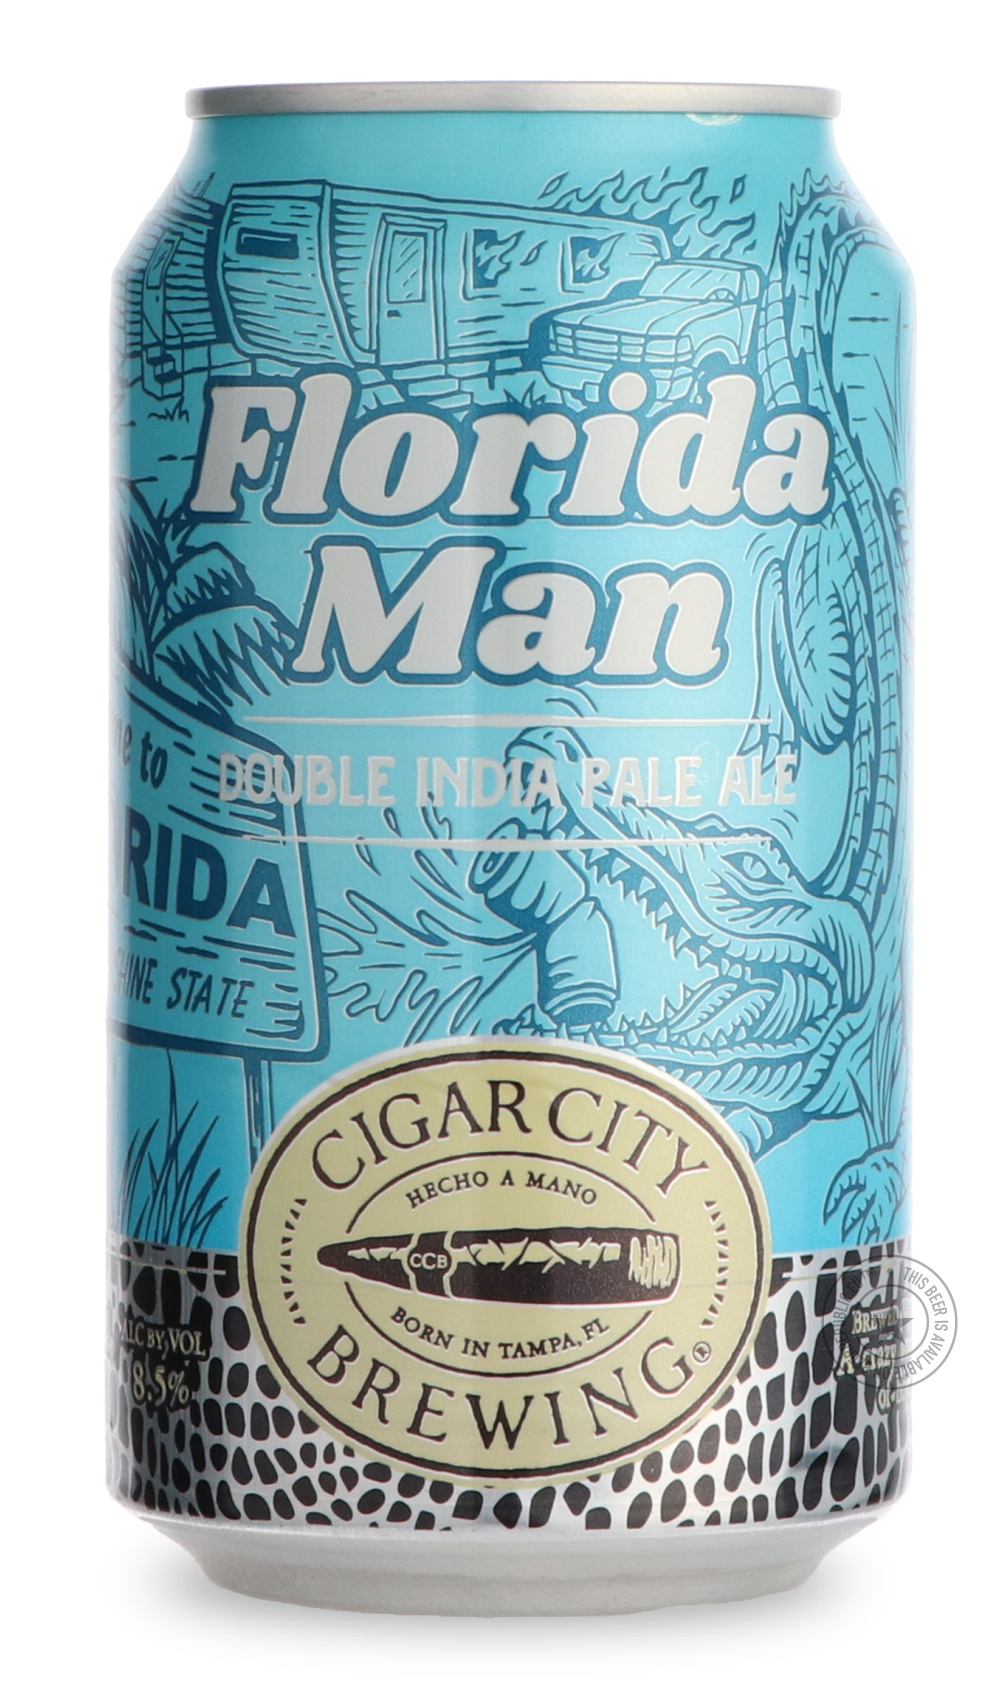 -Cigar City- Florida Man-IPA- Only @ Beer Republic - The best online beer store for American & Canadian craft beer - Buy beer online from the USA and Canada - Bier online kopen - Amerikaans bier kopen - Craft beer store - Craft beer kopen - Amerikanisch bier kaufen - Bier online kaufen - Acheter biere online - IPA - Stout - Porter - New England IPA - Hazy IPA - Imperial Stout - Barrel Aged - Barrel Aged Imperial Stout - Brown - Dark beer - Blond - Blonde - Pilsner - Lager - Wheat - Weizen - Amber - Barley W